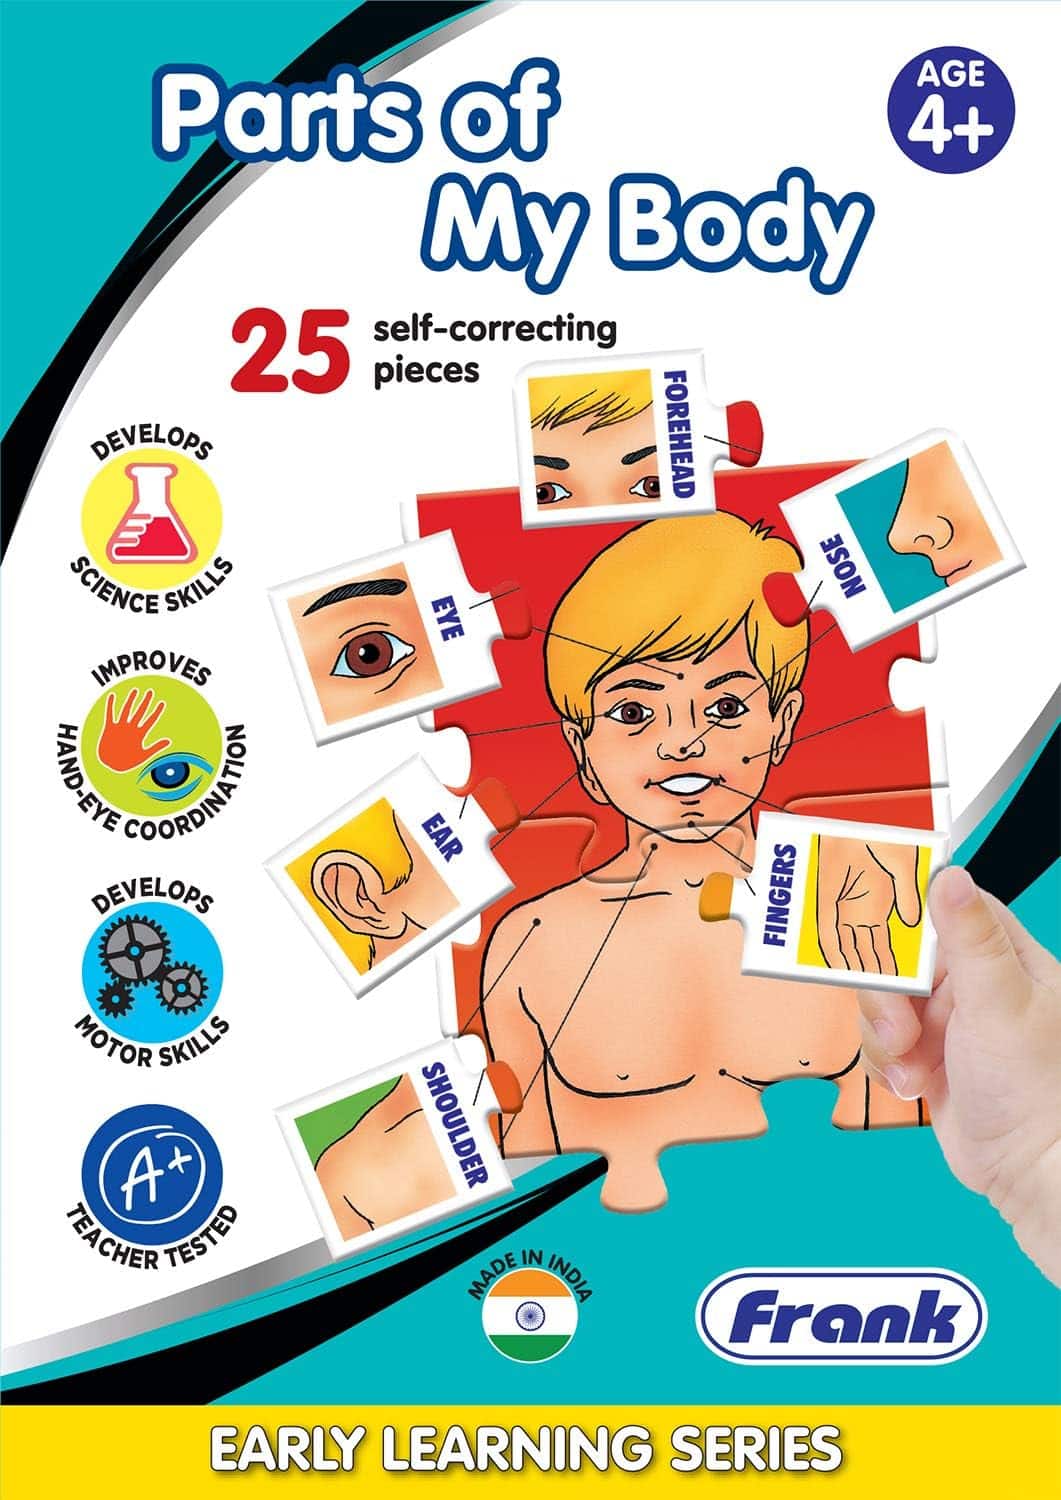 Frank Parts of My Body Puzzle – 25 Self-Correcting Puzzle Pieces, Early Learner Educational Jigsaw Puzzle Set with Images | Ages 4 & Above | Educational Toys and Games